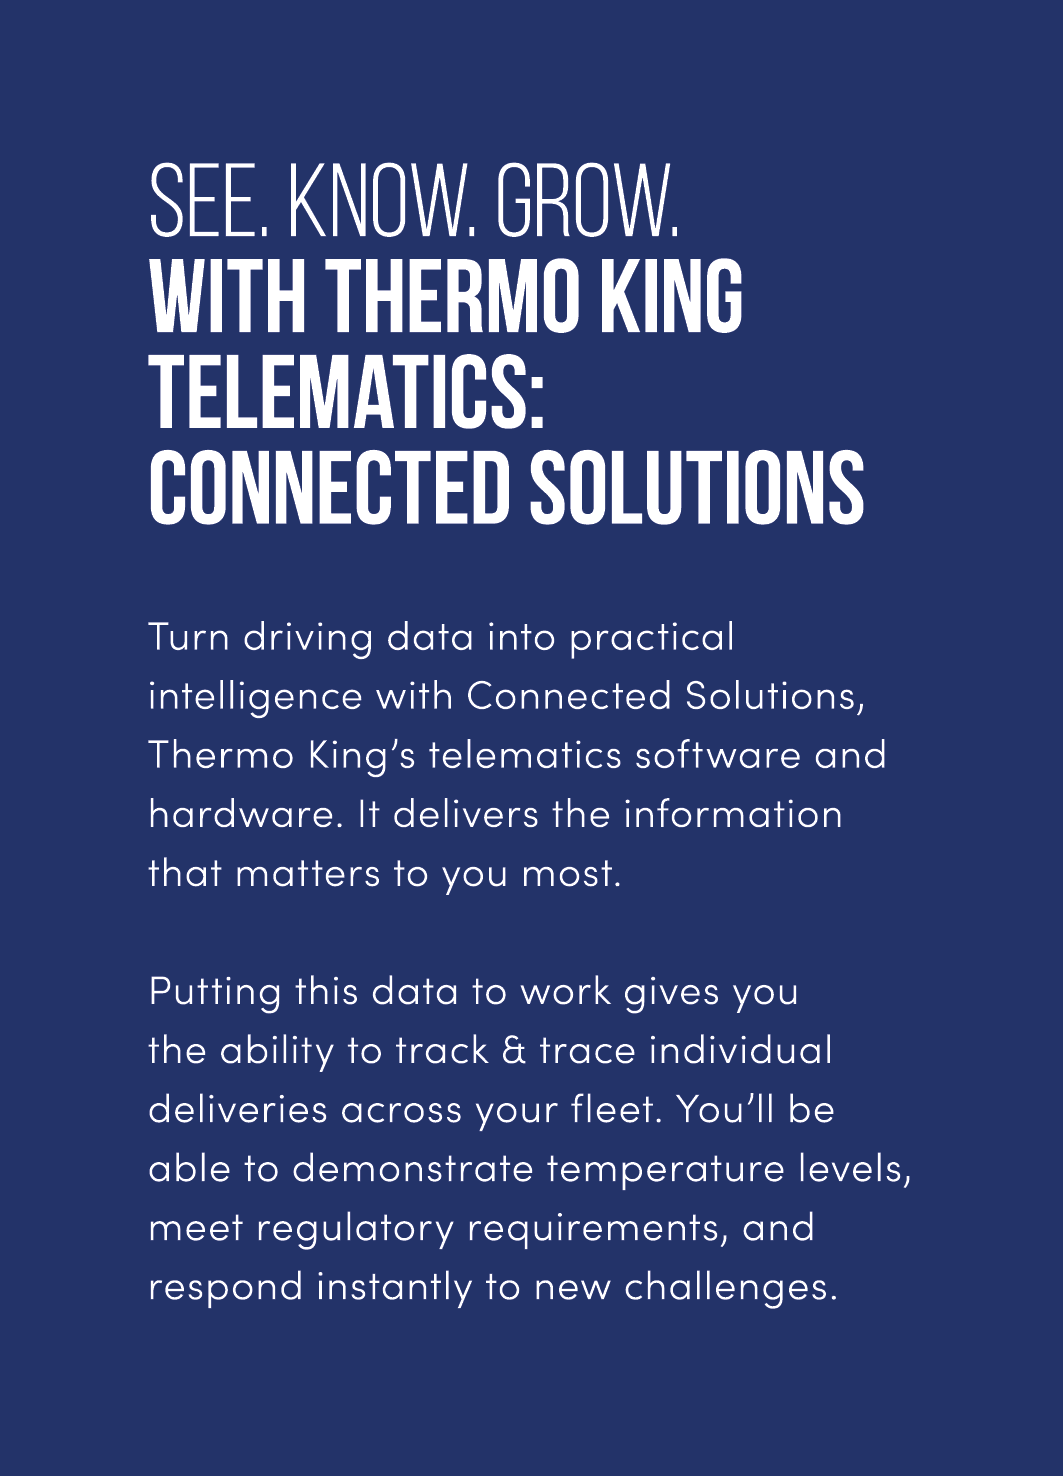 See. Know. Grow. with Thermo King telematics: Connected Solutions  Turn driving data into practical intelligence wit...